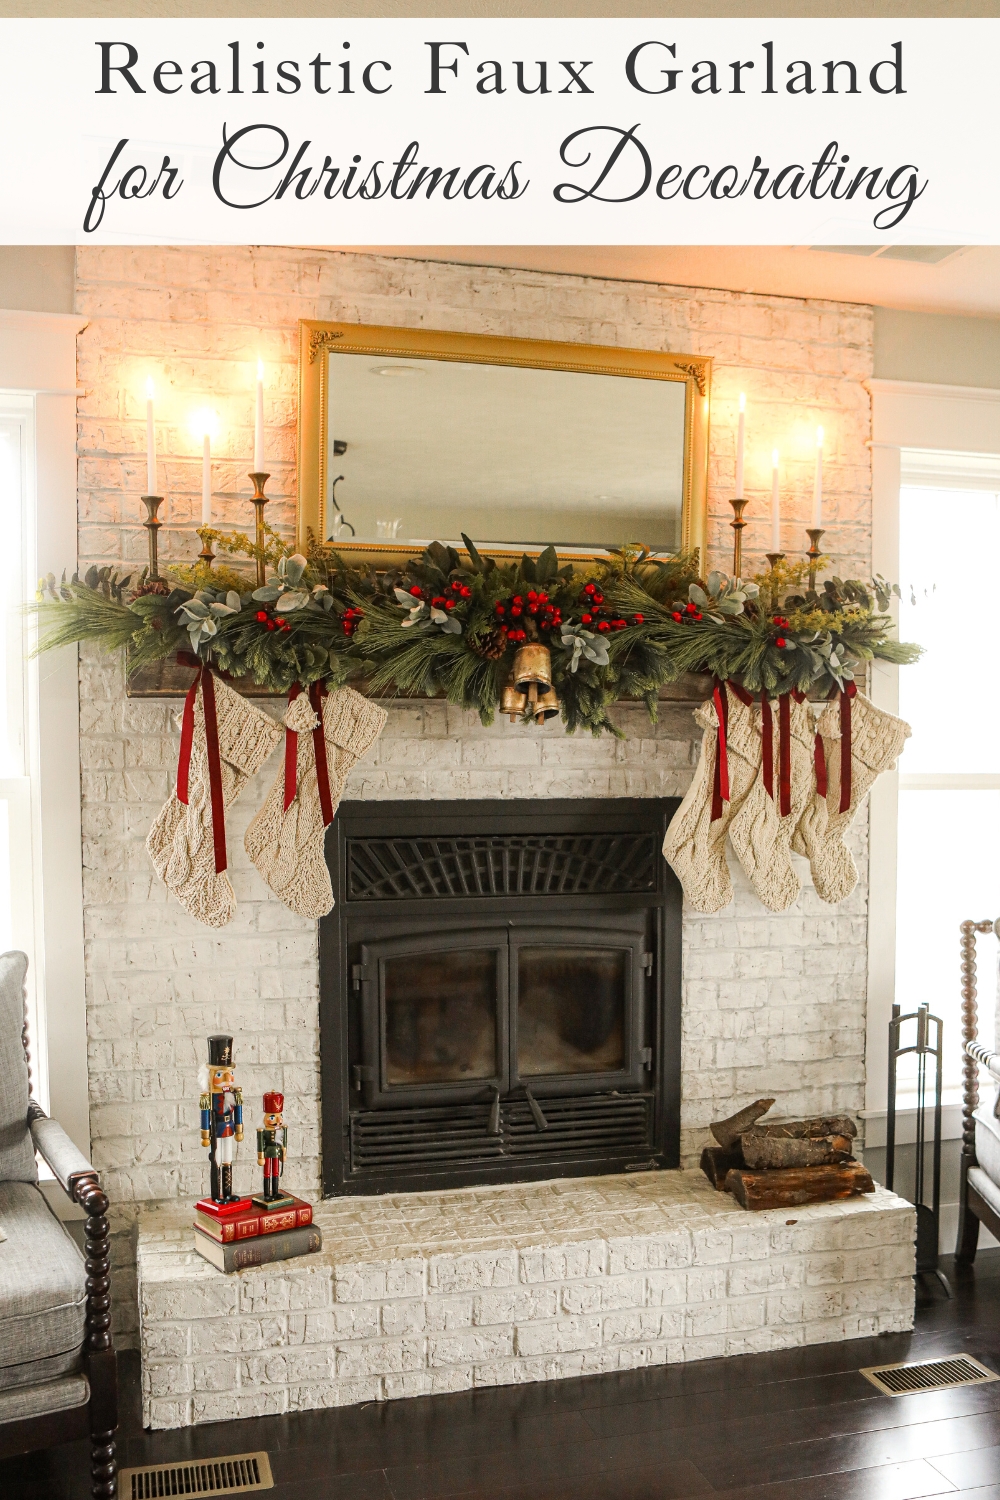 Realistic Faux Garland for Christmas